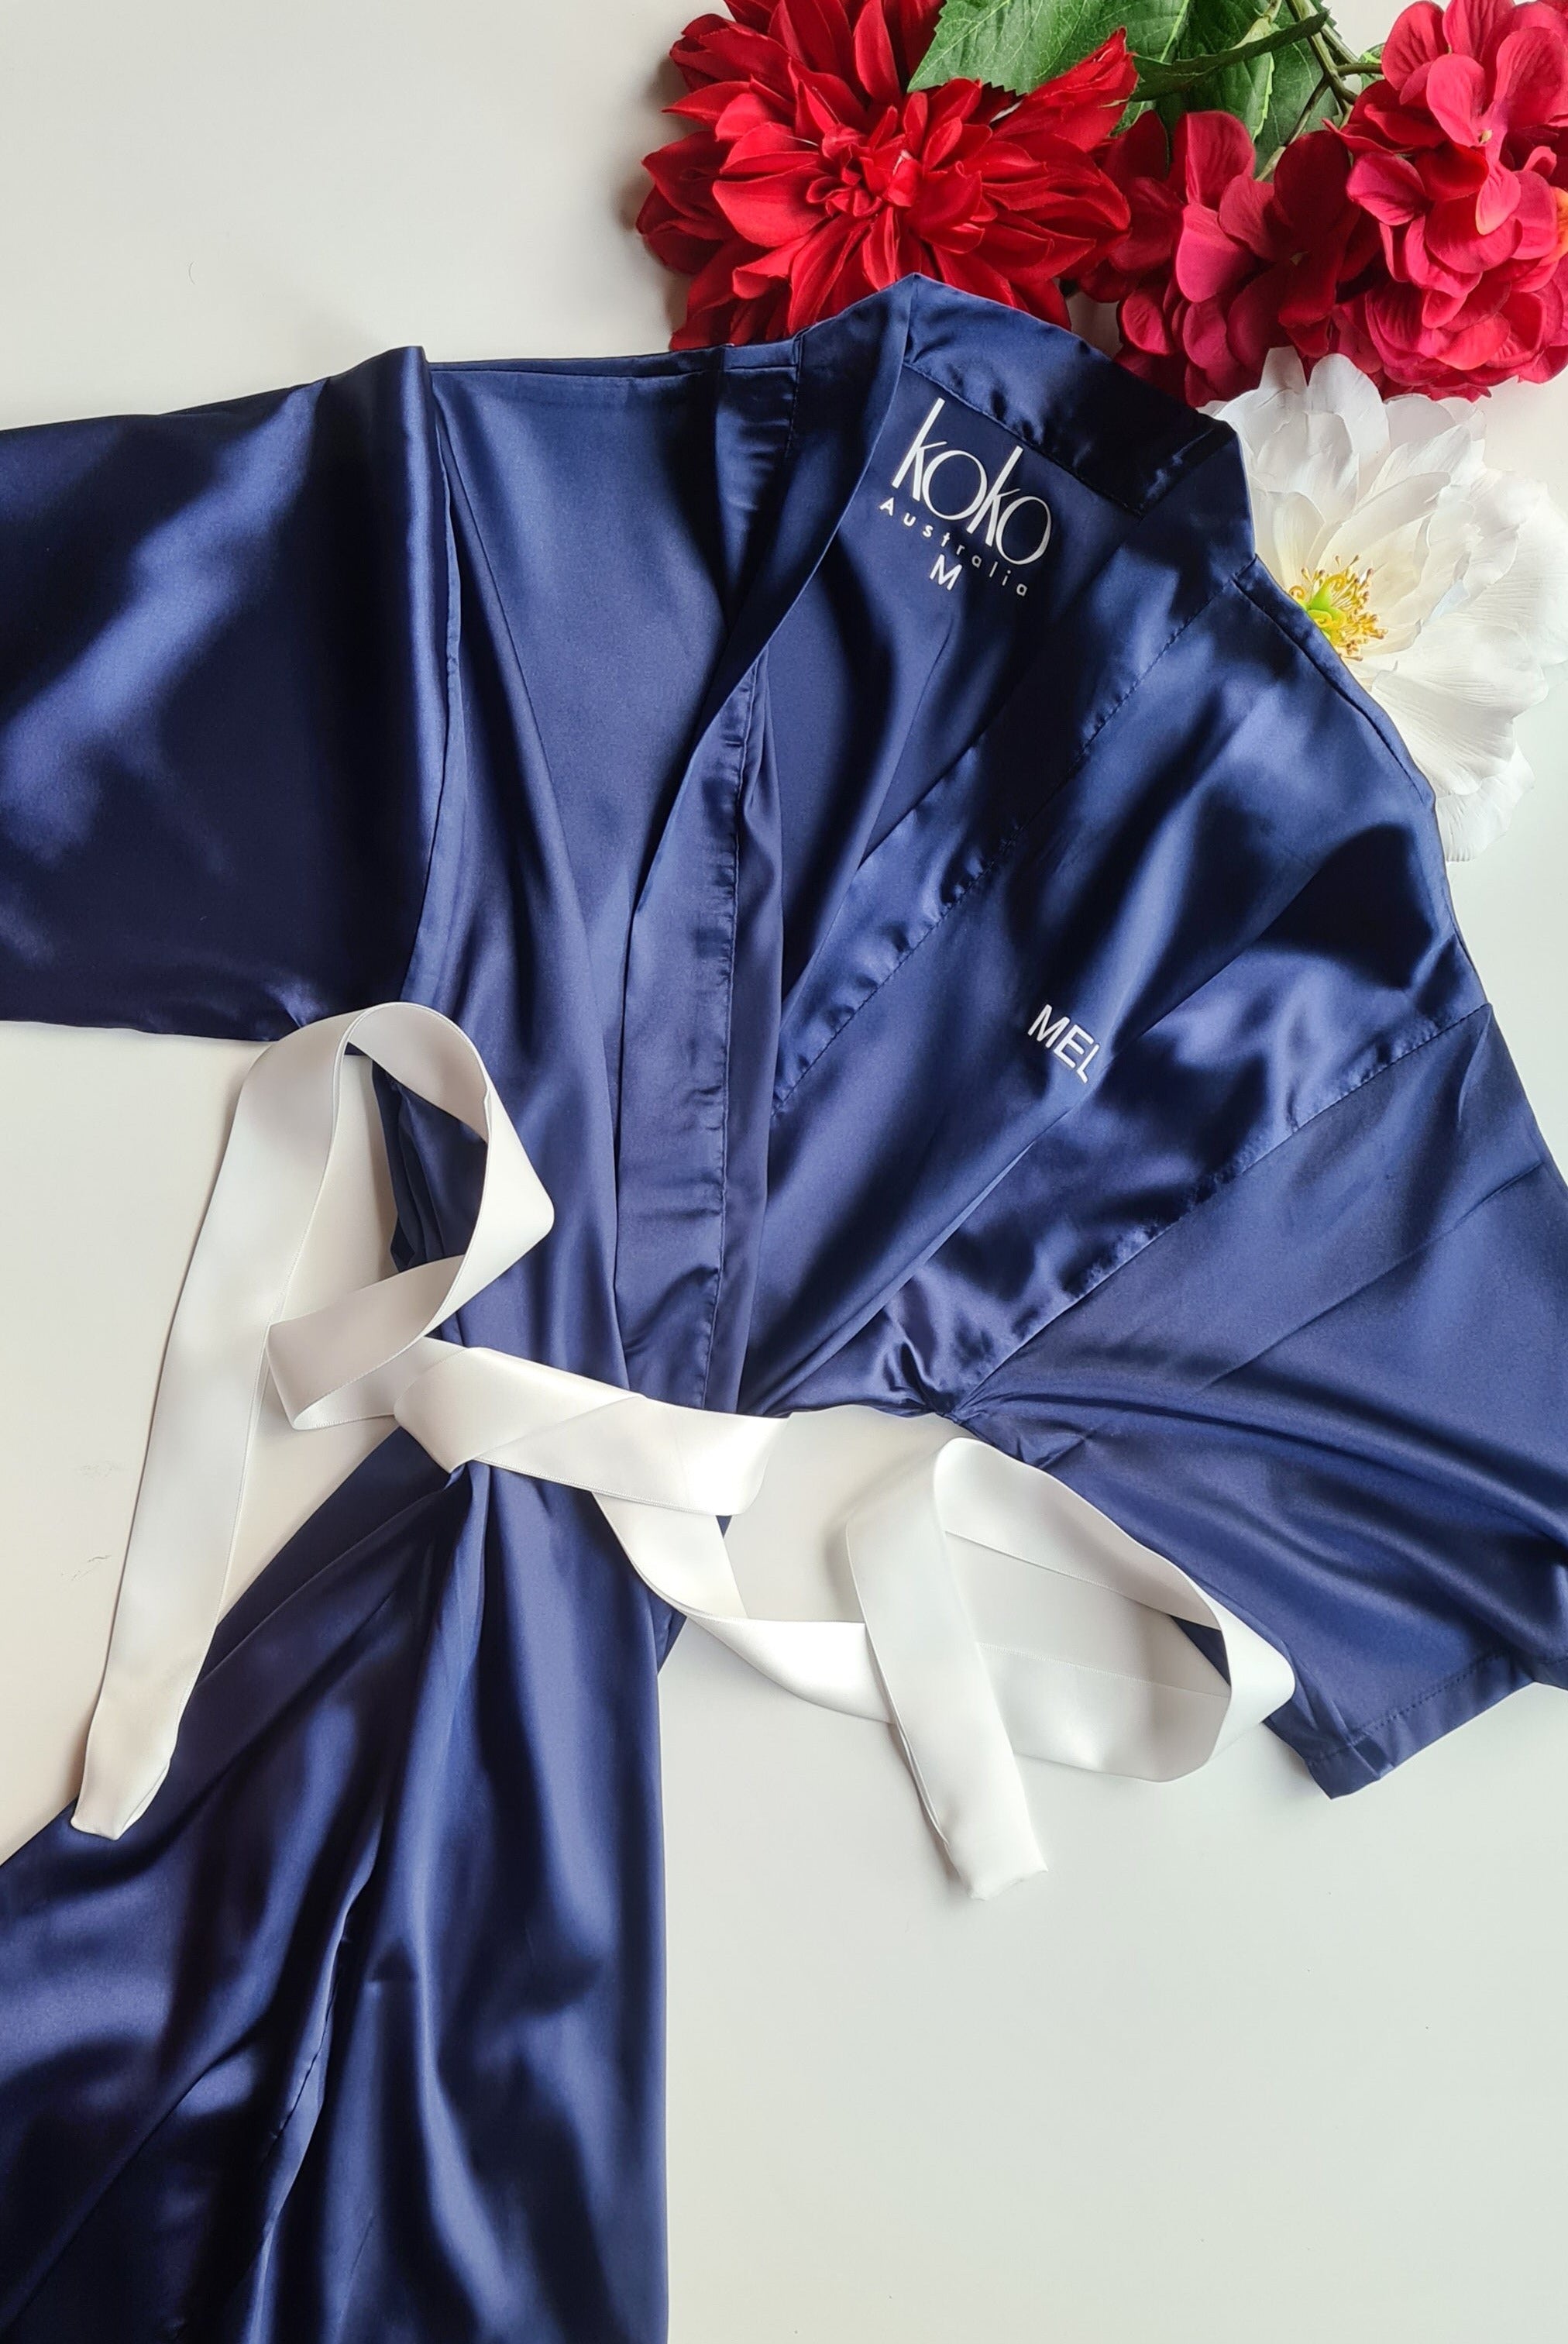 Custom coaching robes for bodybuilding competition